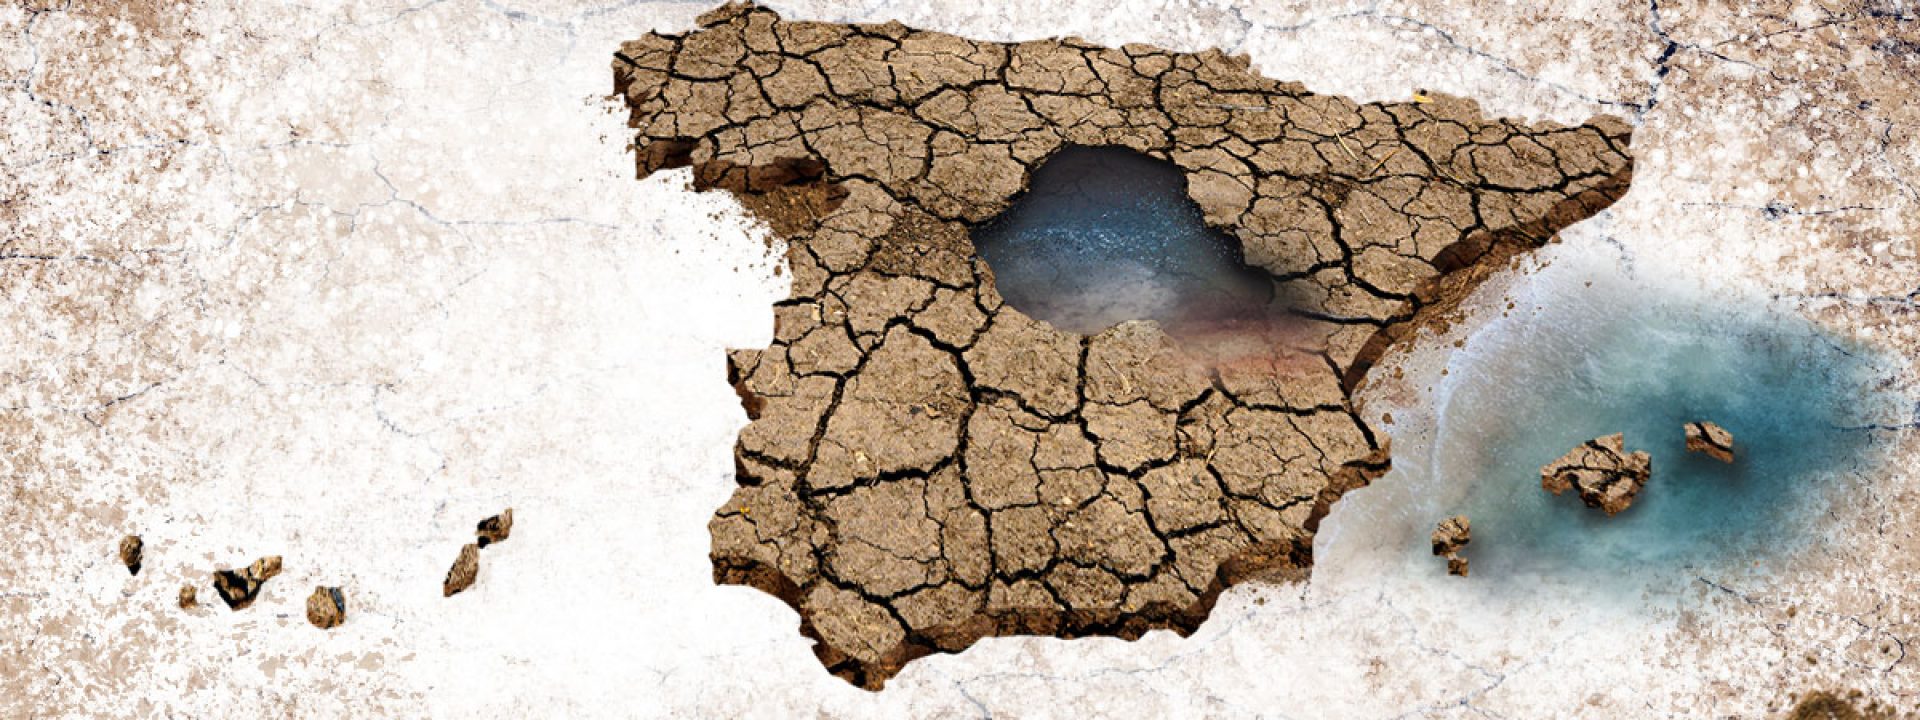 Water in Spain: the challenge of a dry land